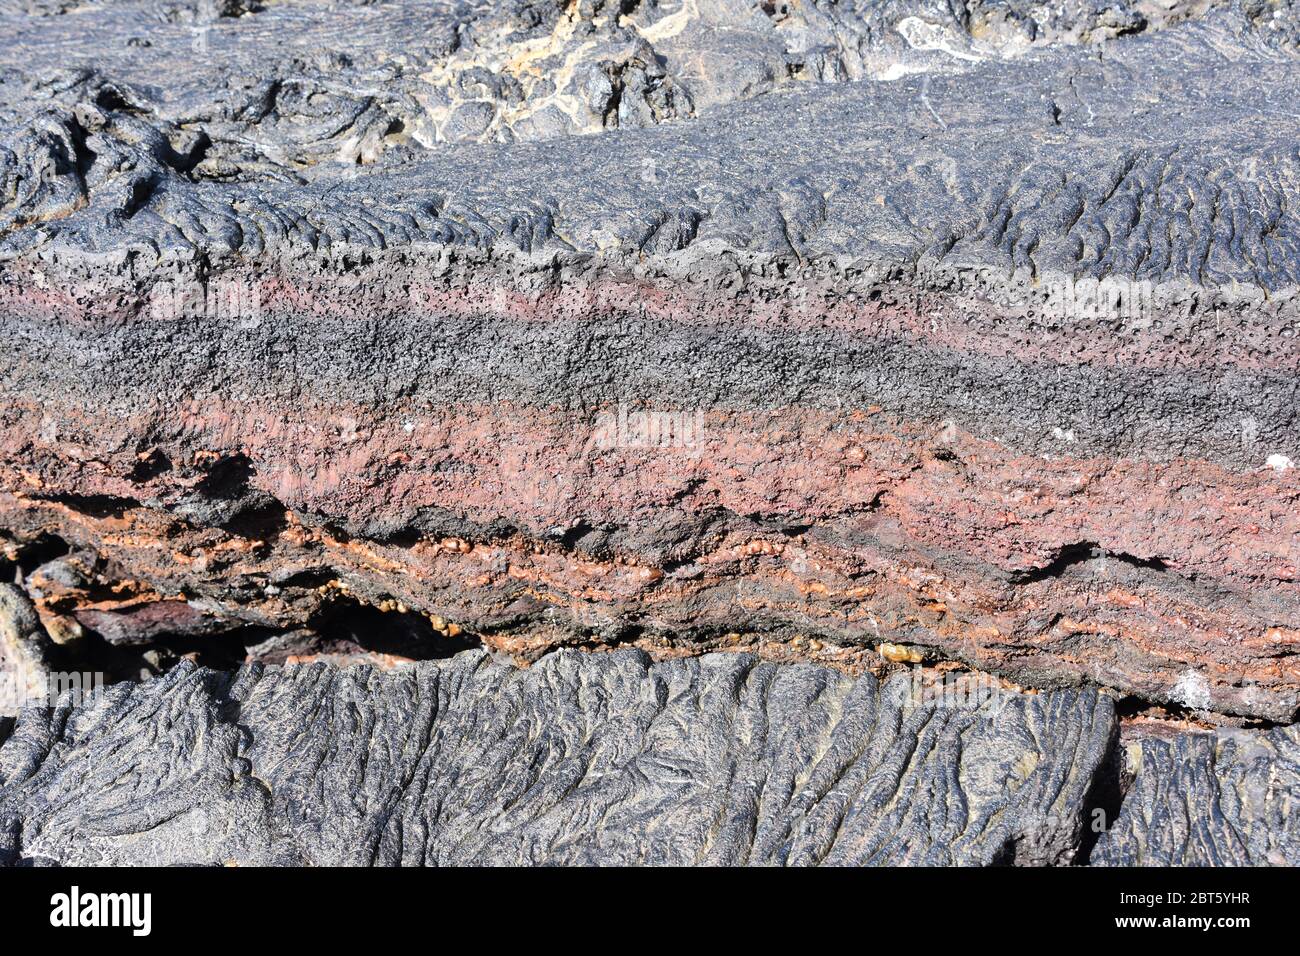 Crack in igneous rock dry lava colorful minerals Stock Photo